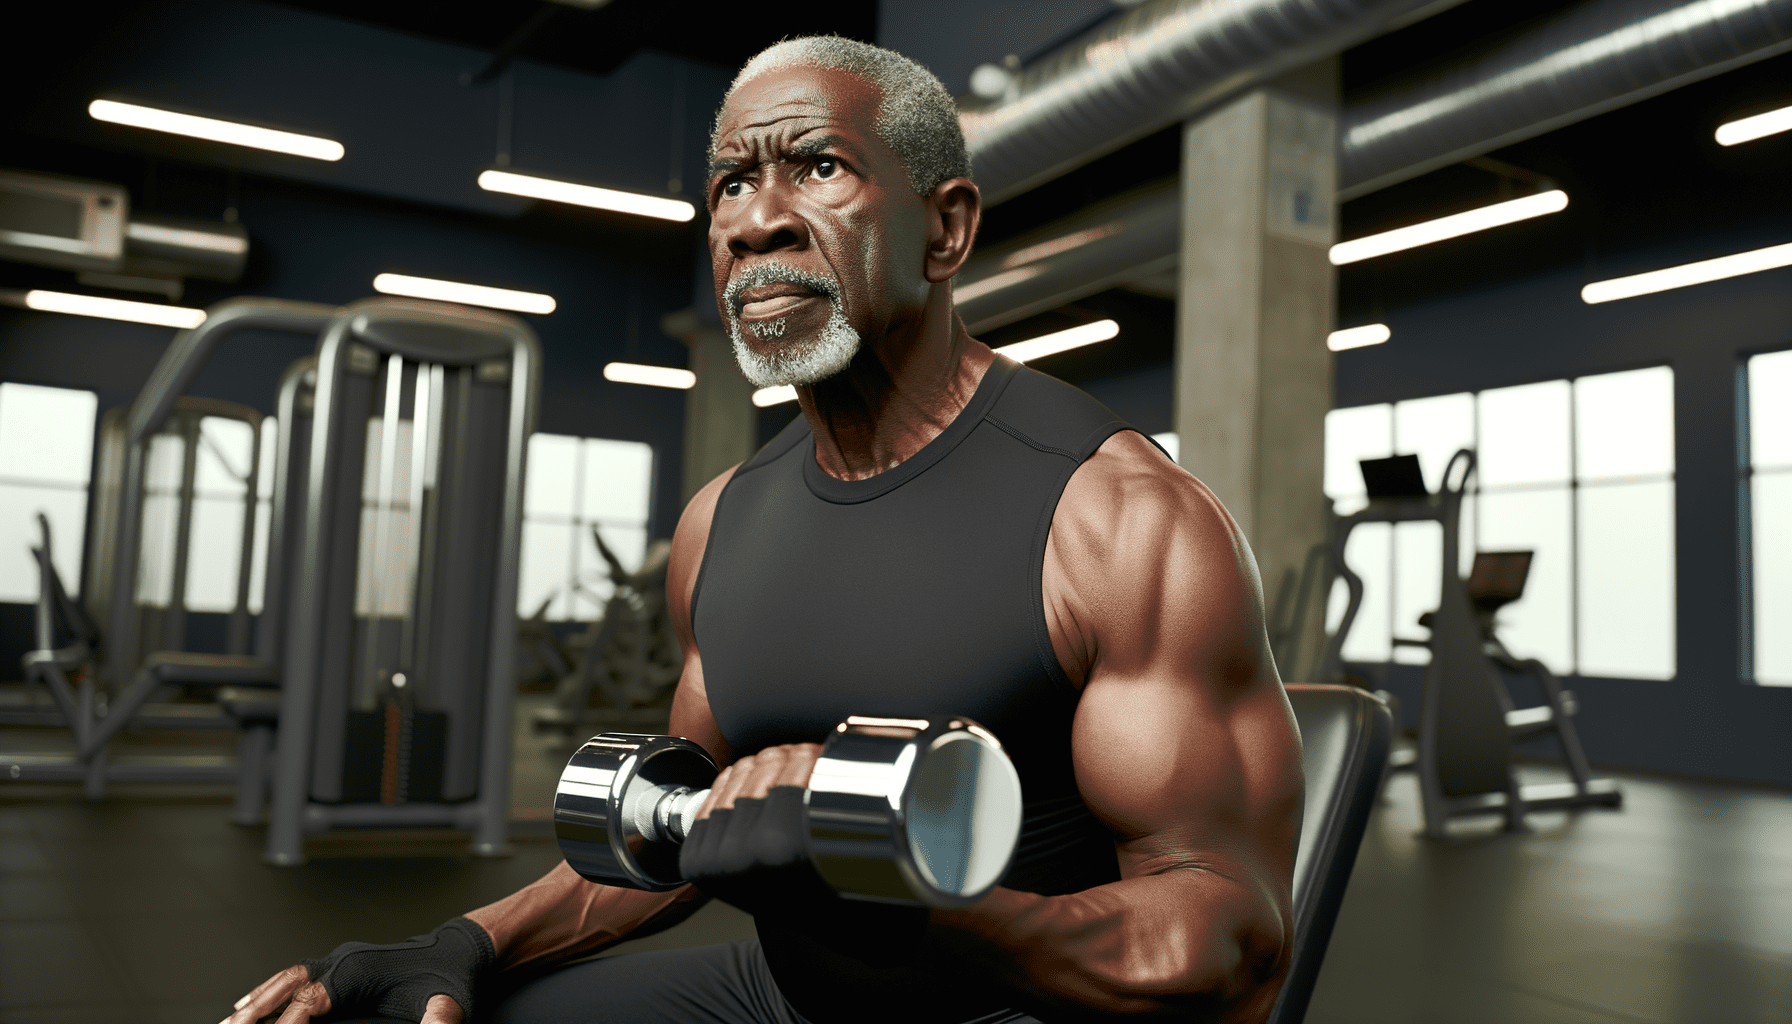 Senior Strength: Overcoming Age Barriers in Weight Training